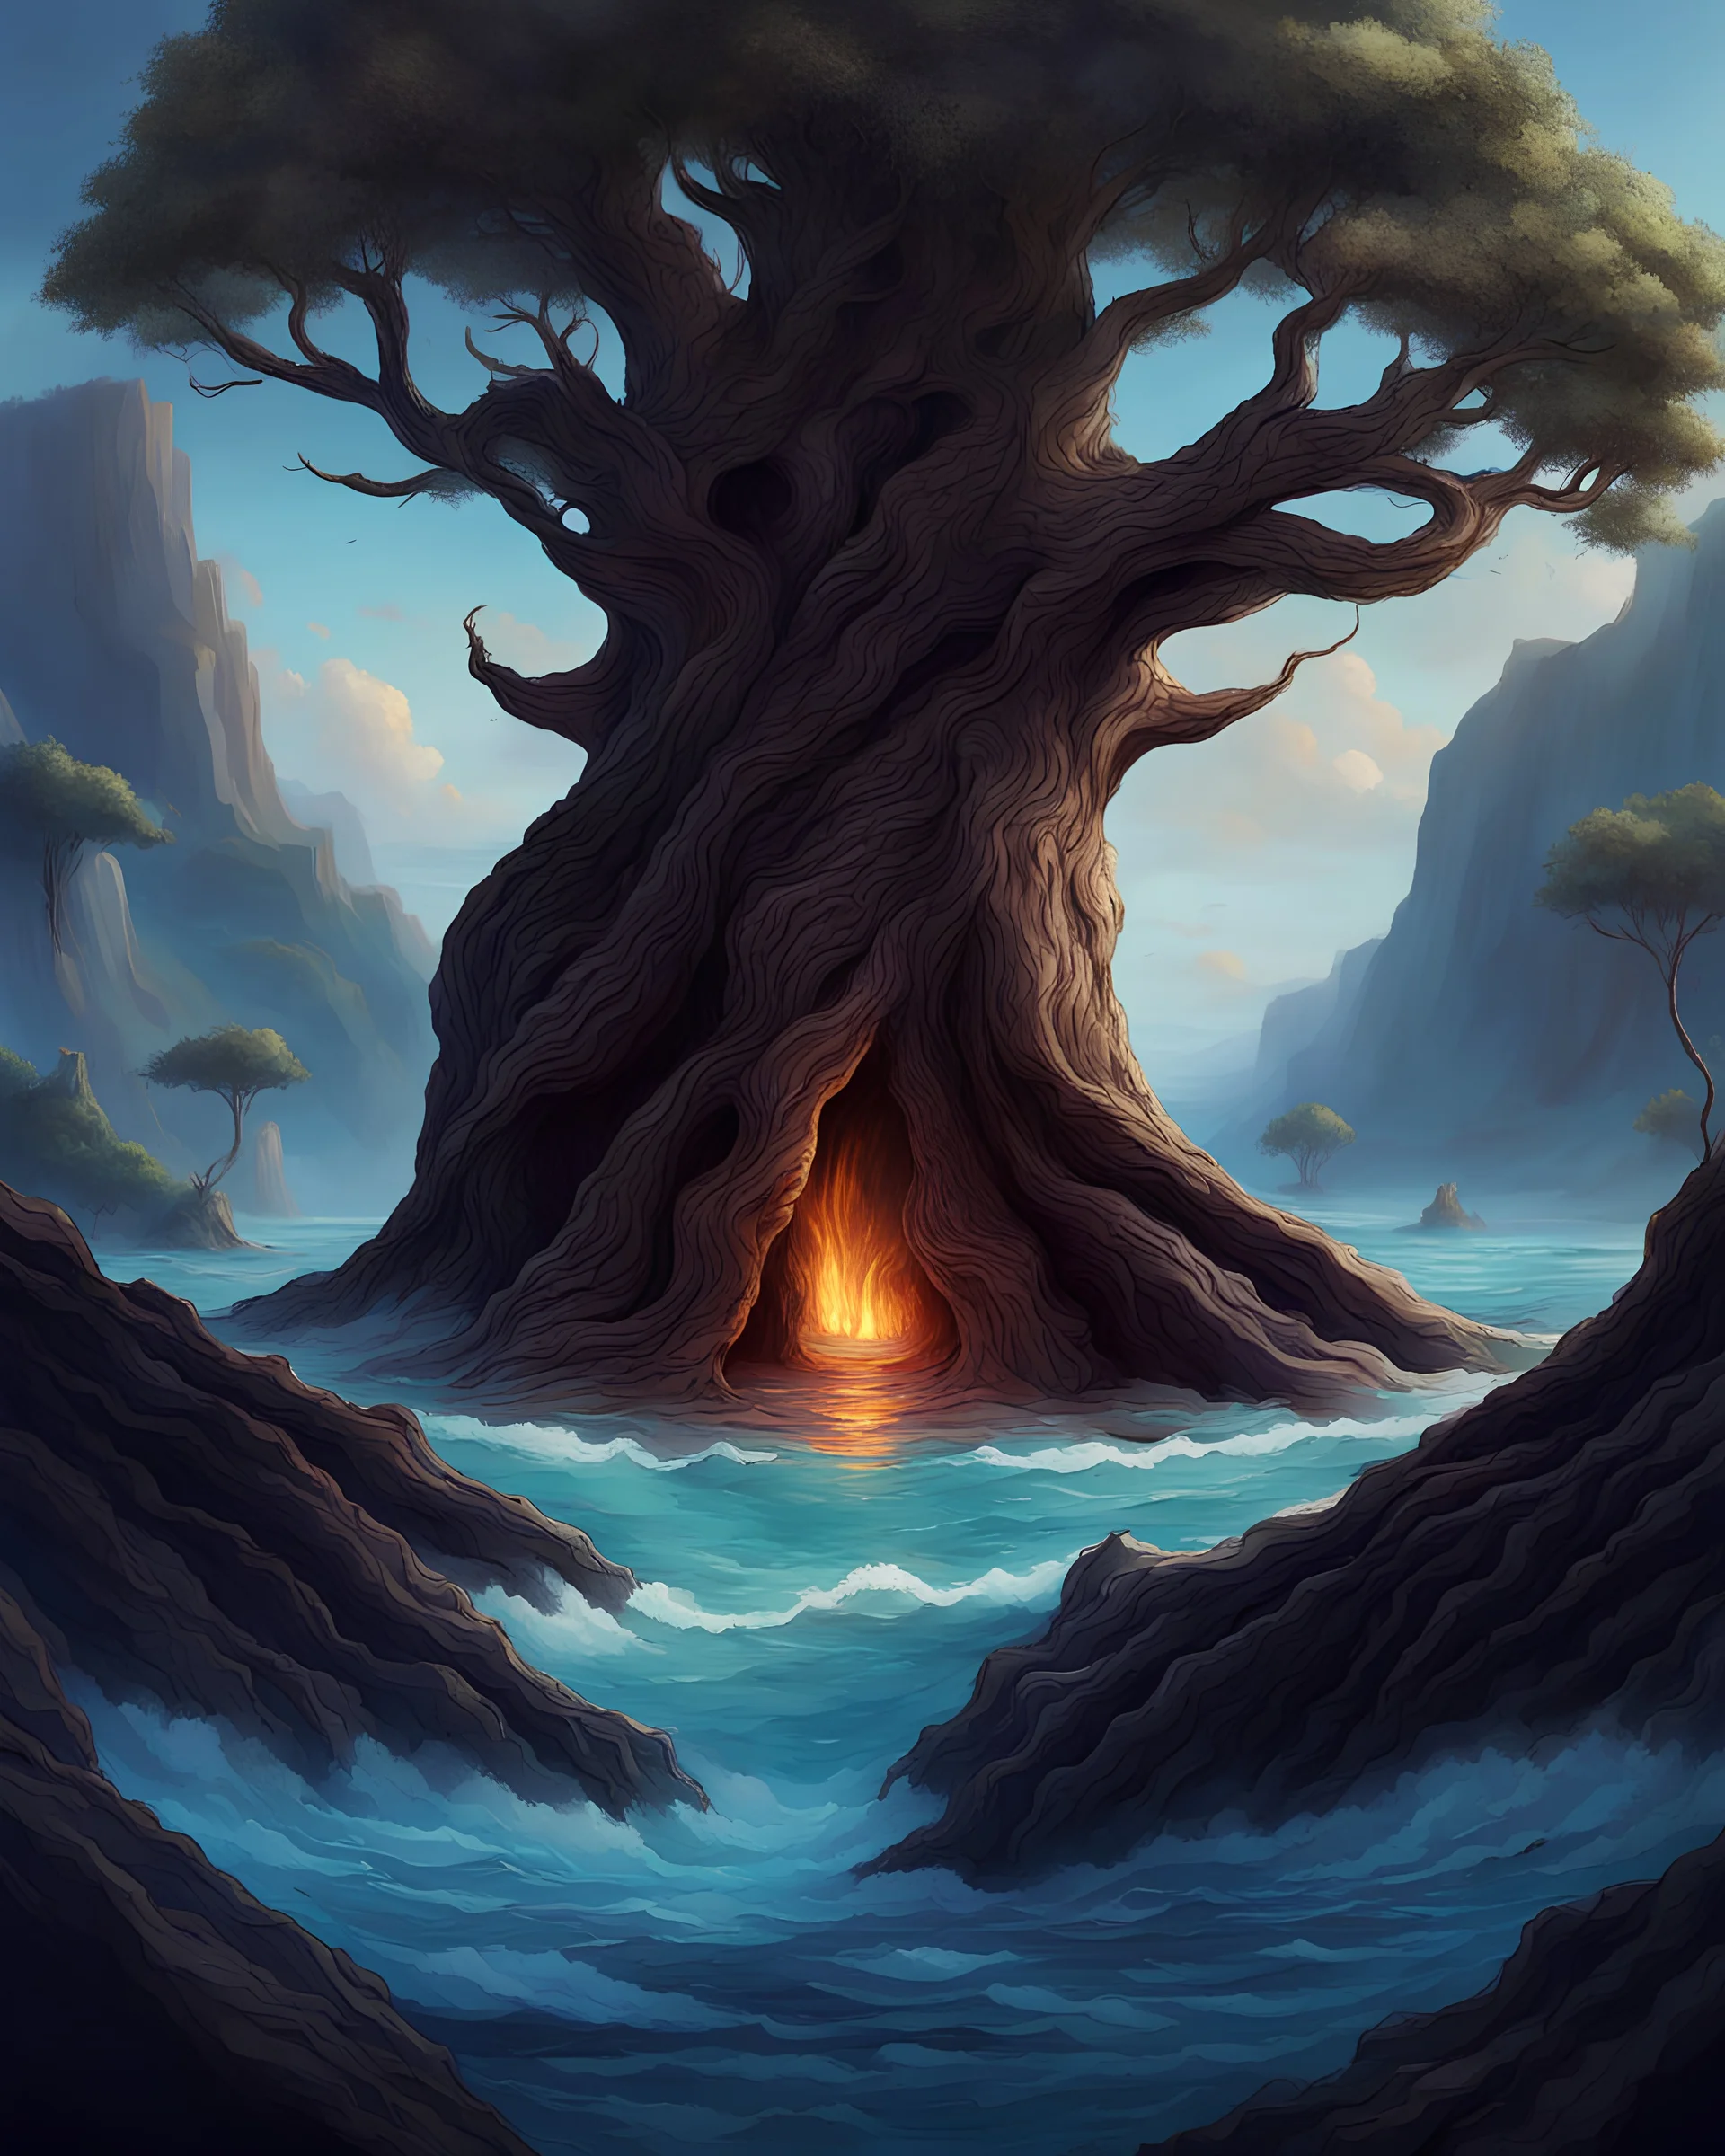 a great tree trunk takes up the majority of the screen. It is surrounded by ocean, which pours into the center of the charred wooden flesh